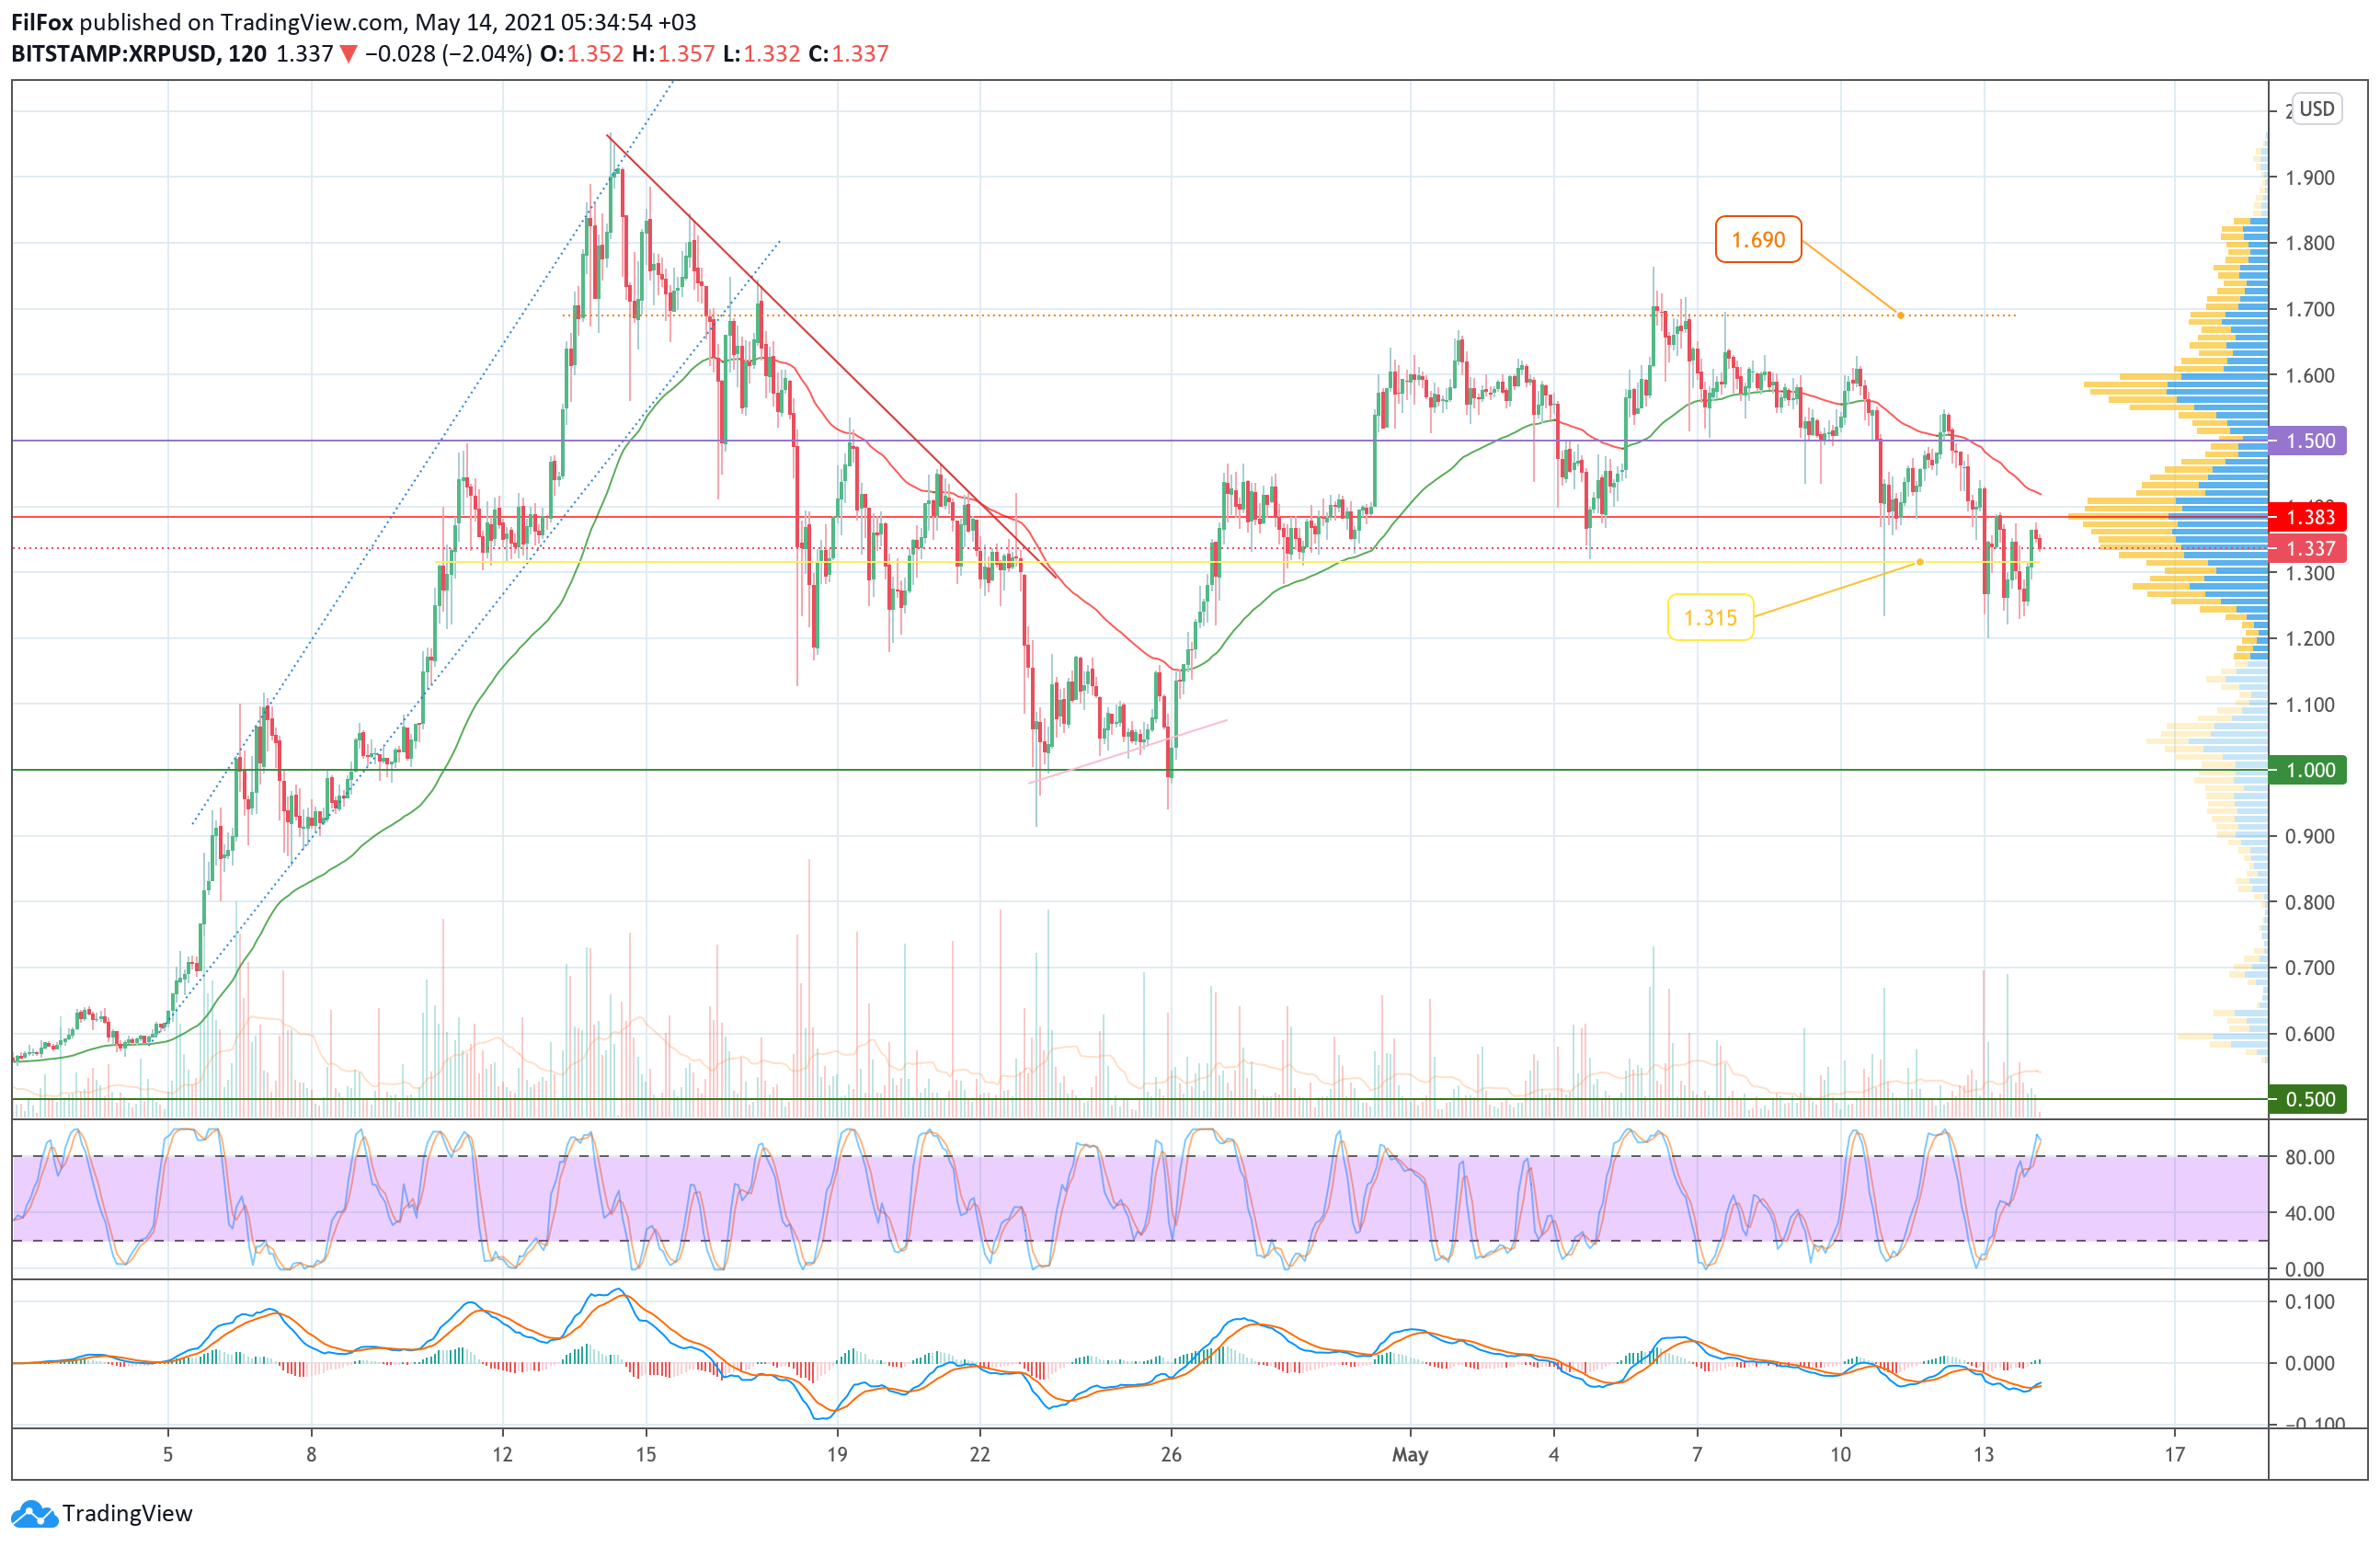 Analysis of the prices of Bitcoin, Ethereum, XRP for 05/14/2021